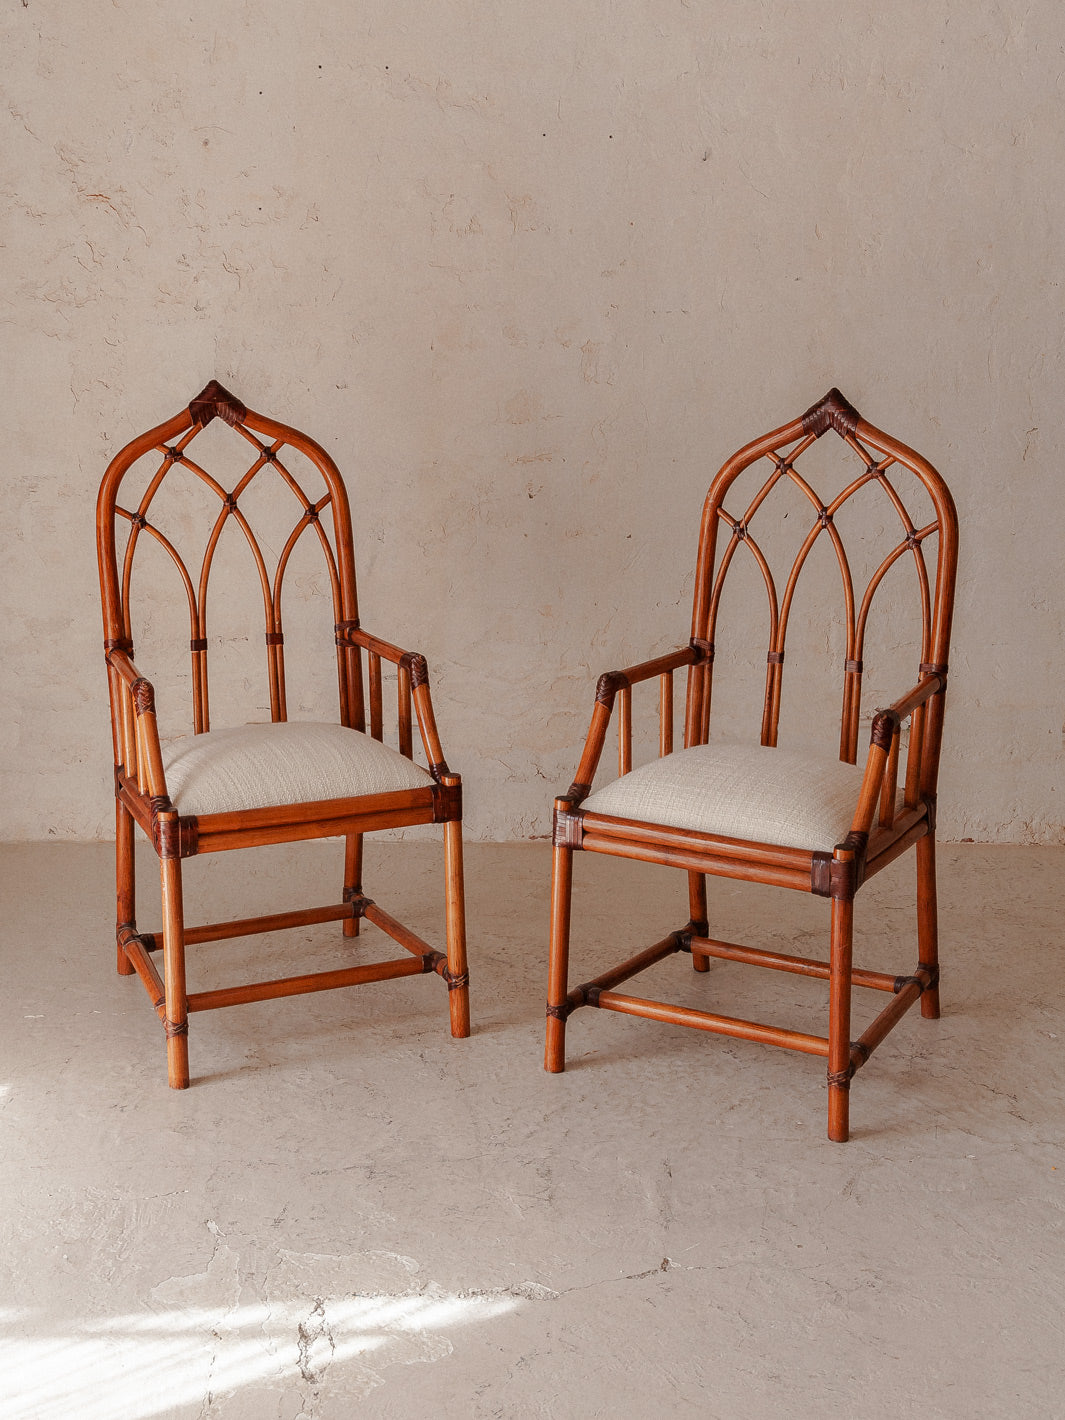 Pair of Mcguire chairs from the 70s